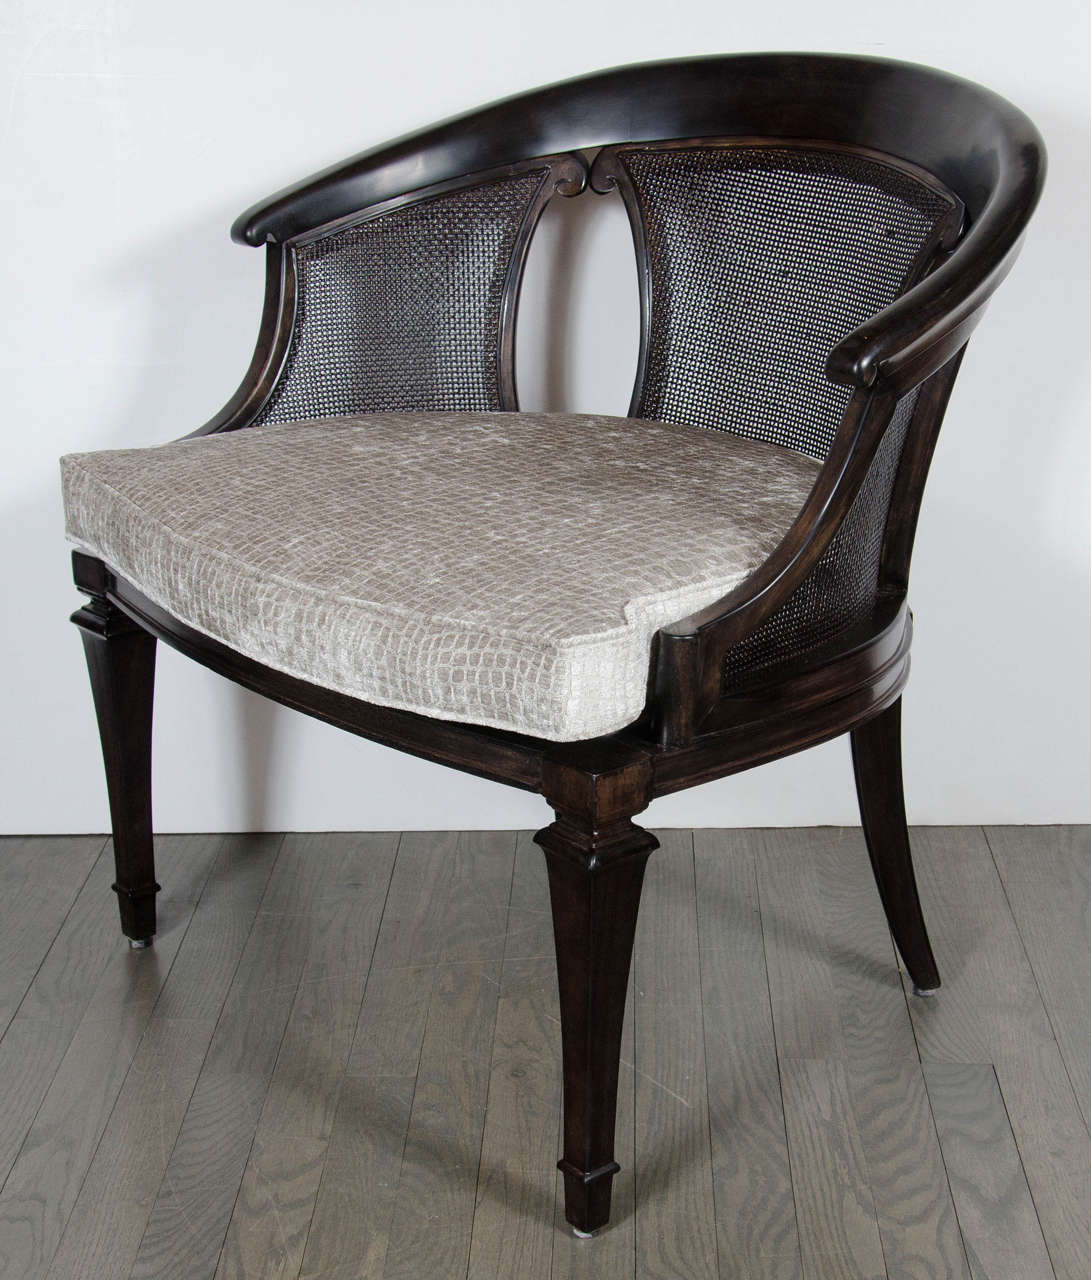 Mid-20th Century Chic Pair of Mid-Century Modernist Ebonized Walnut & Cane Occasional Chairs